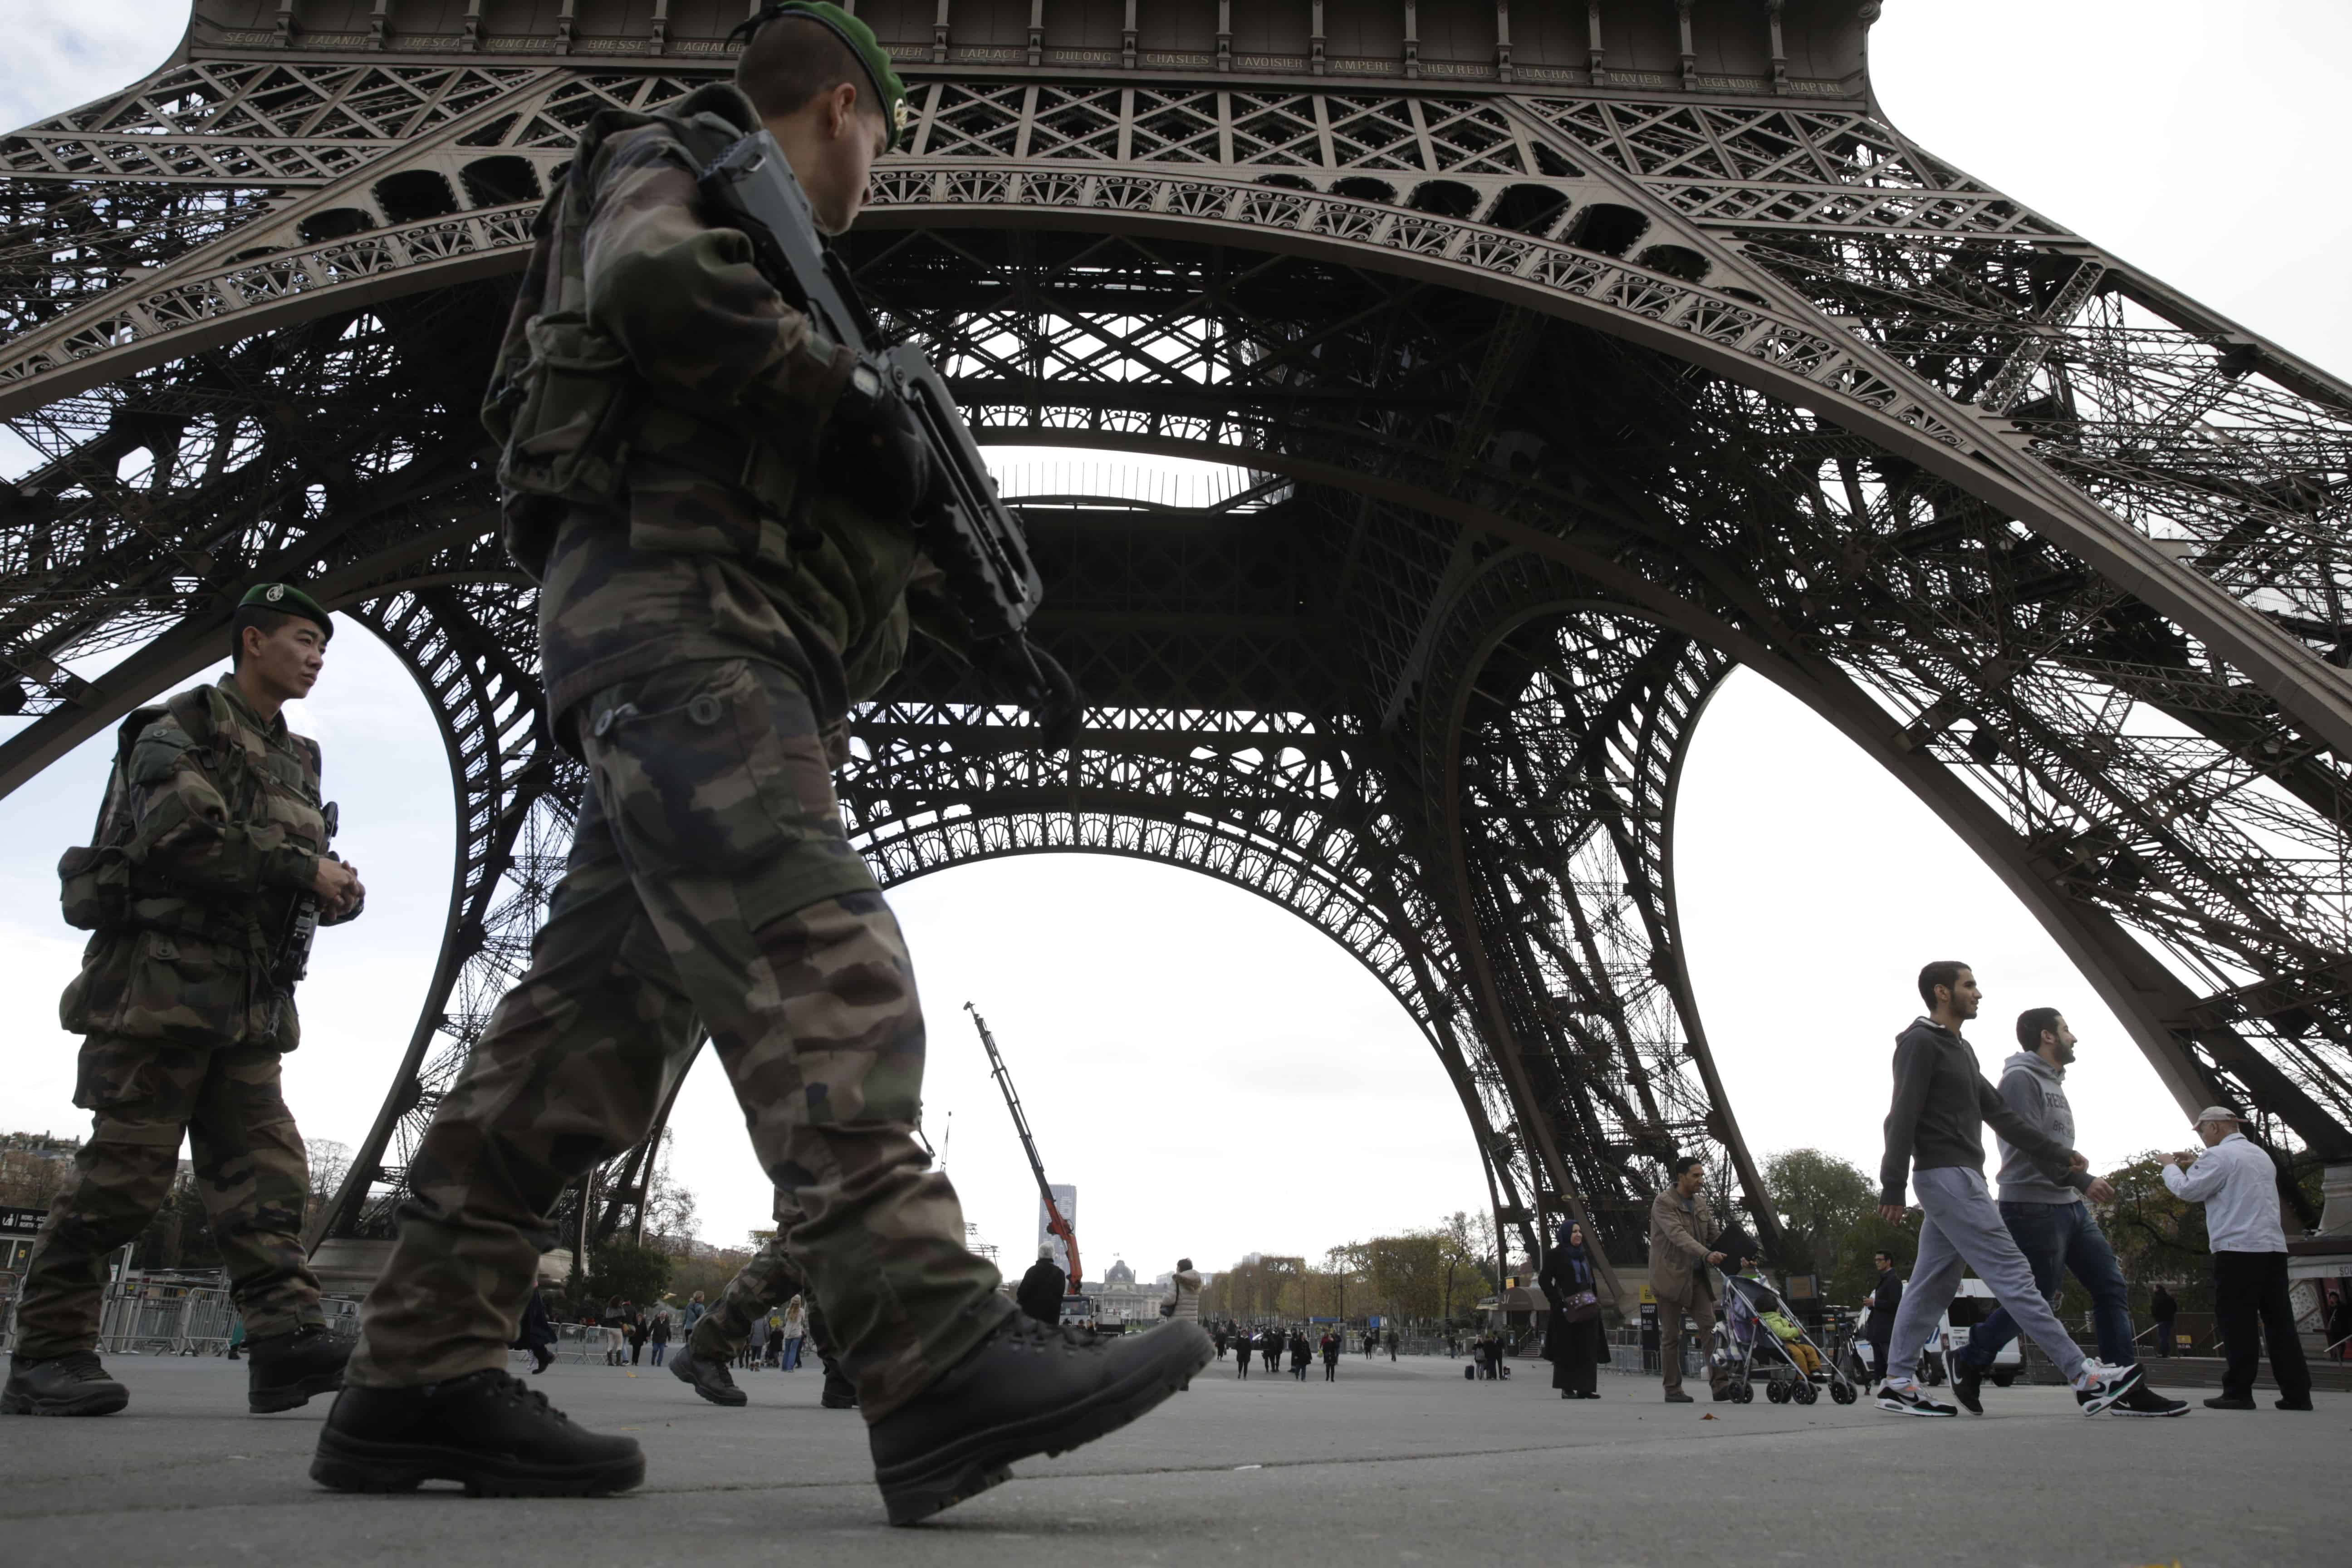 Soldiers patrol at the foot of the Eiffel Tower in Paris